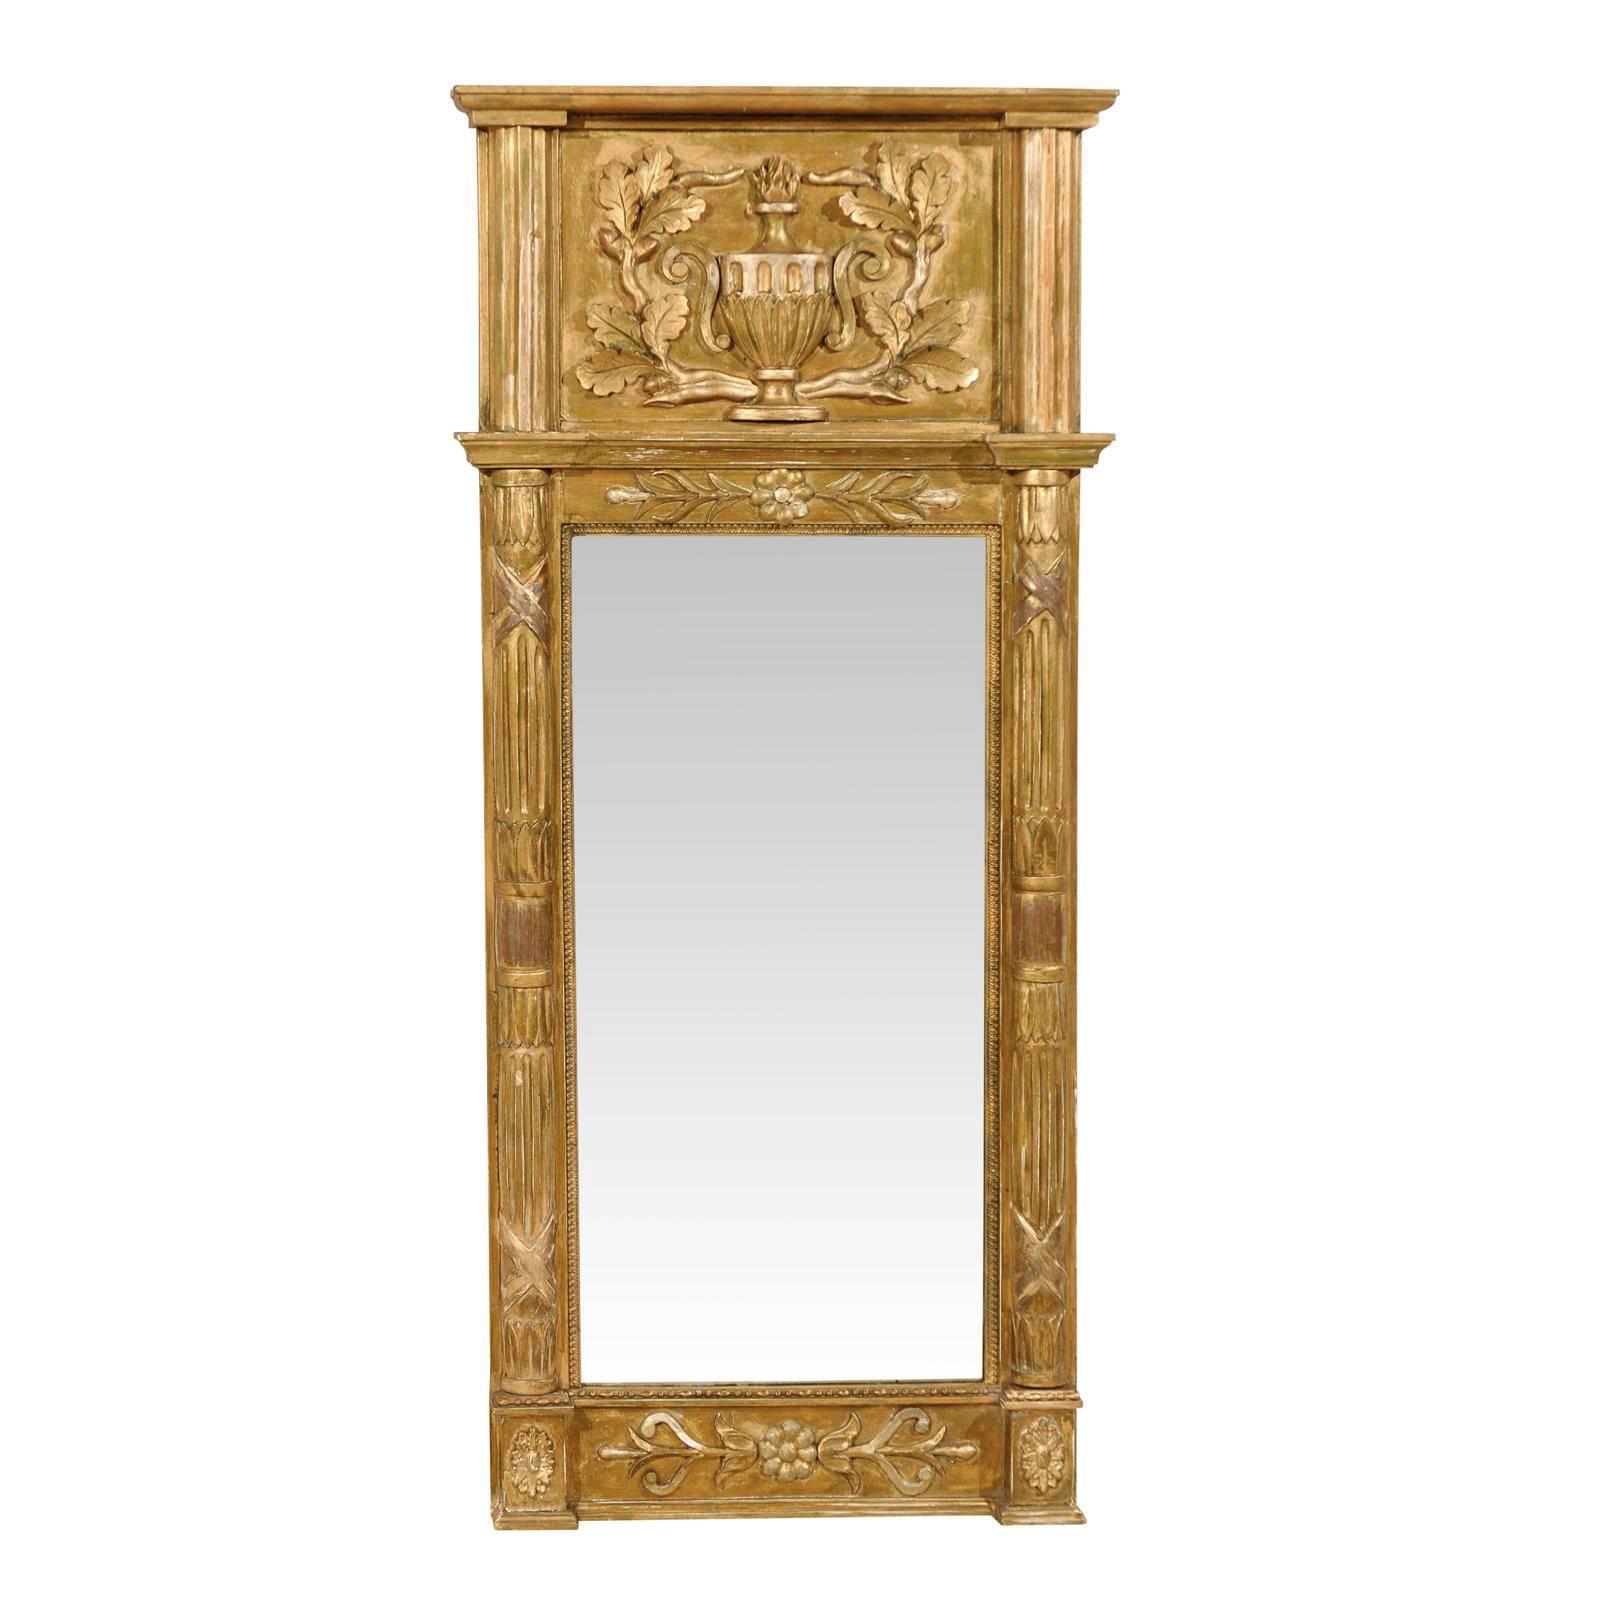 Swedish 19th Century Gilded Wood Mirror with Fire Urn Carving